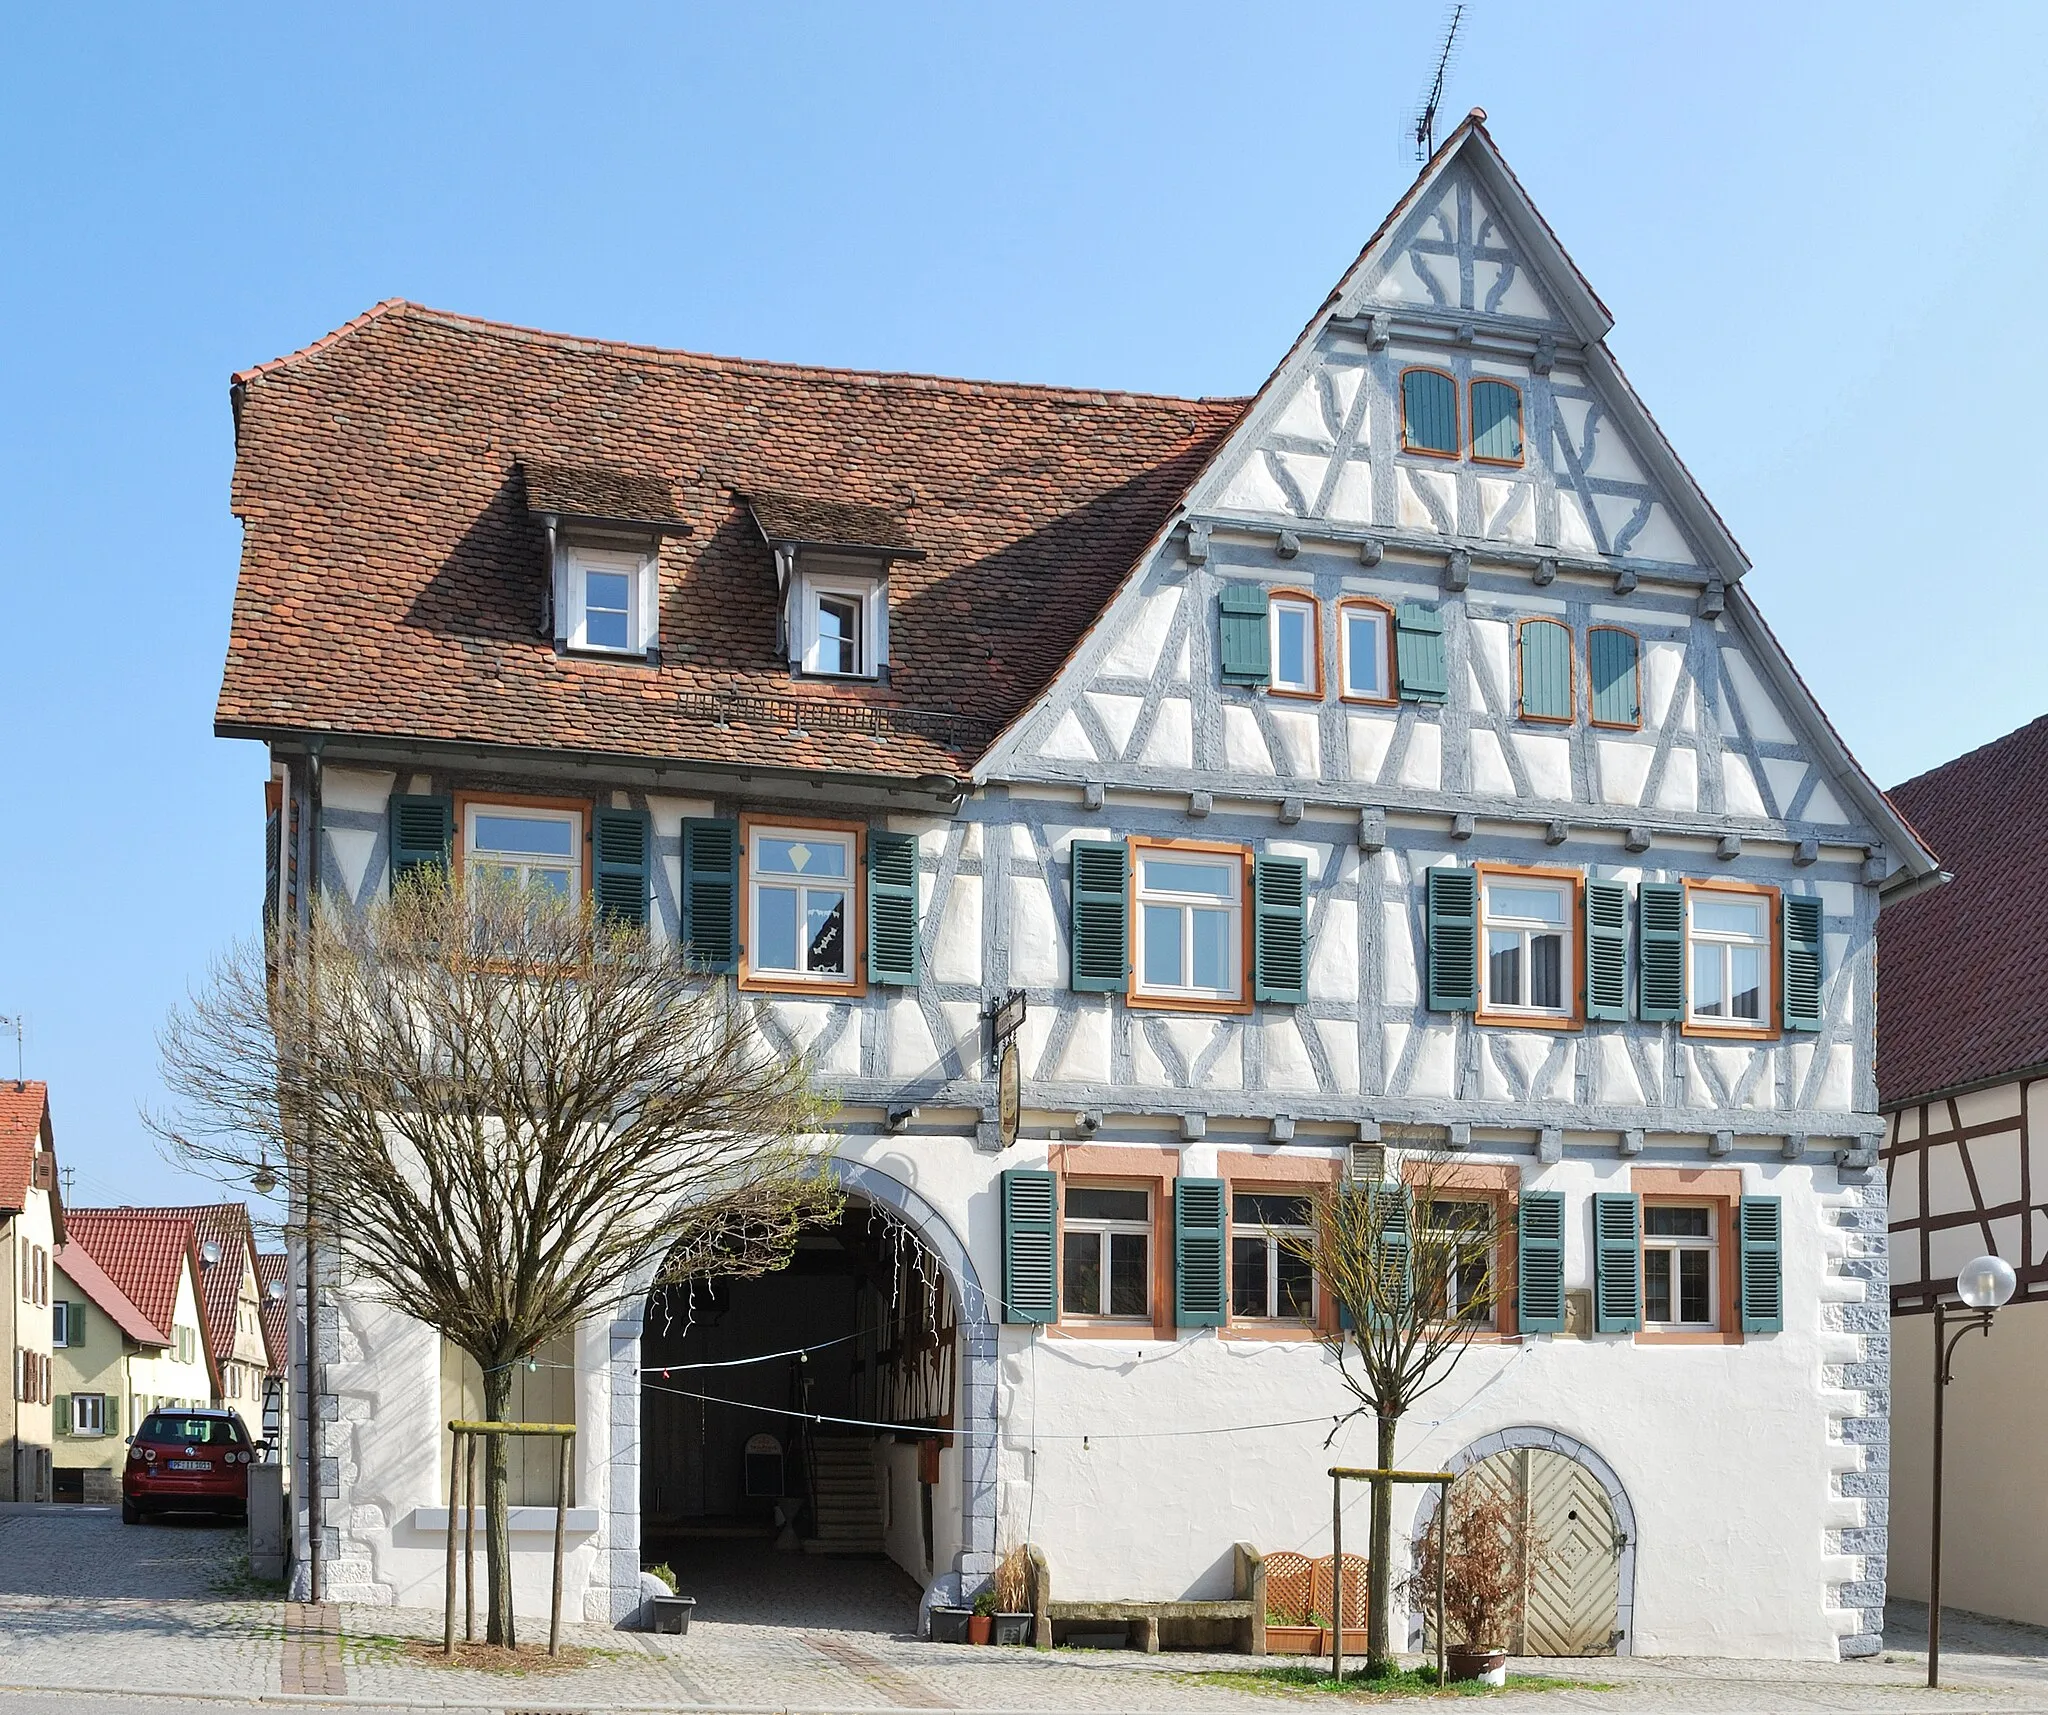 Photo showing: Timber framing in Knittlinger street in Lienzingen, a district of the city Mühlacker in Southern Germany.